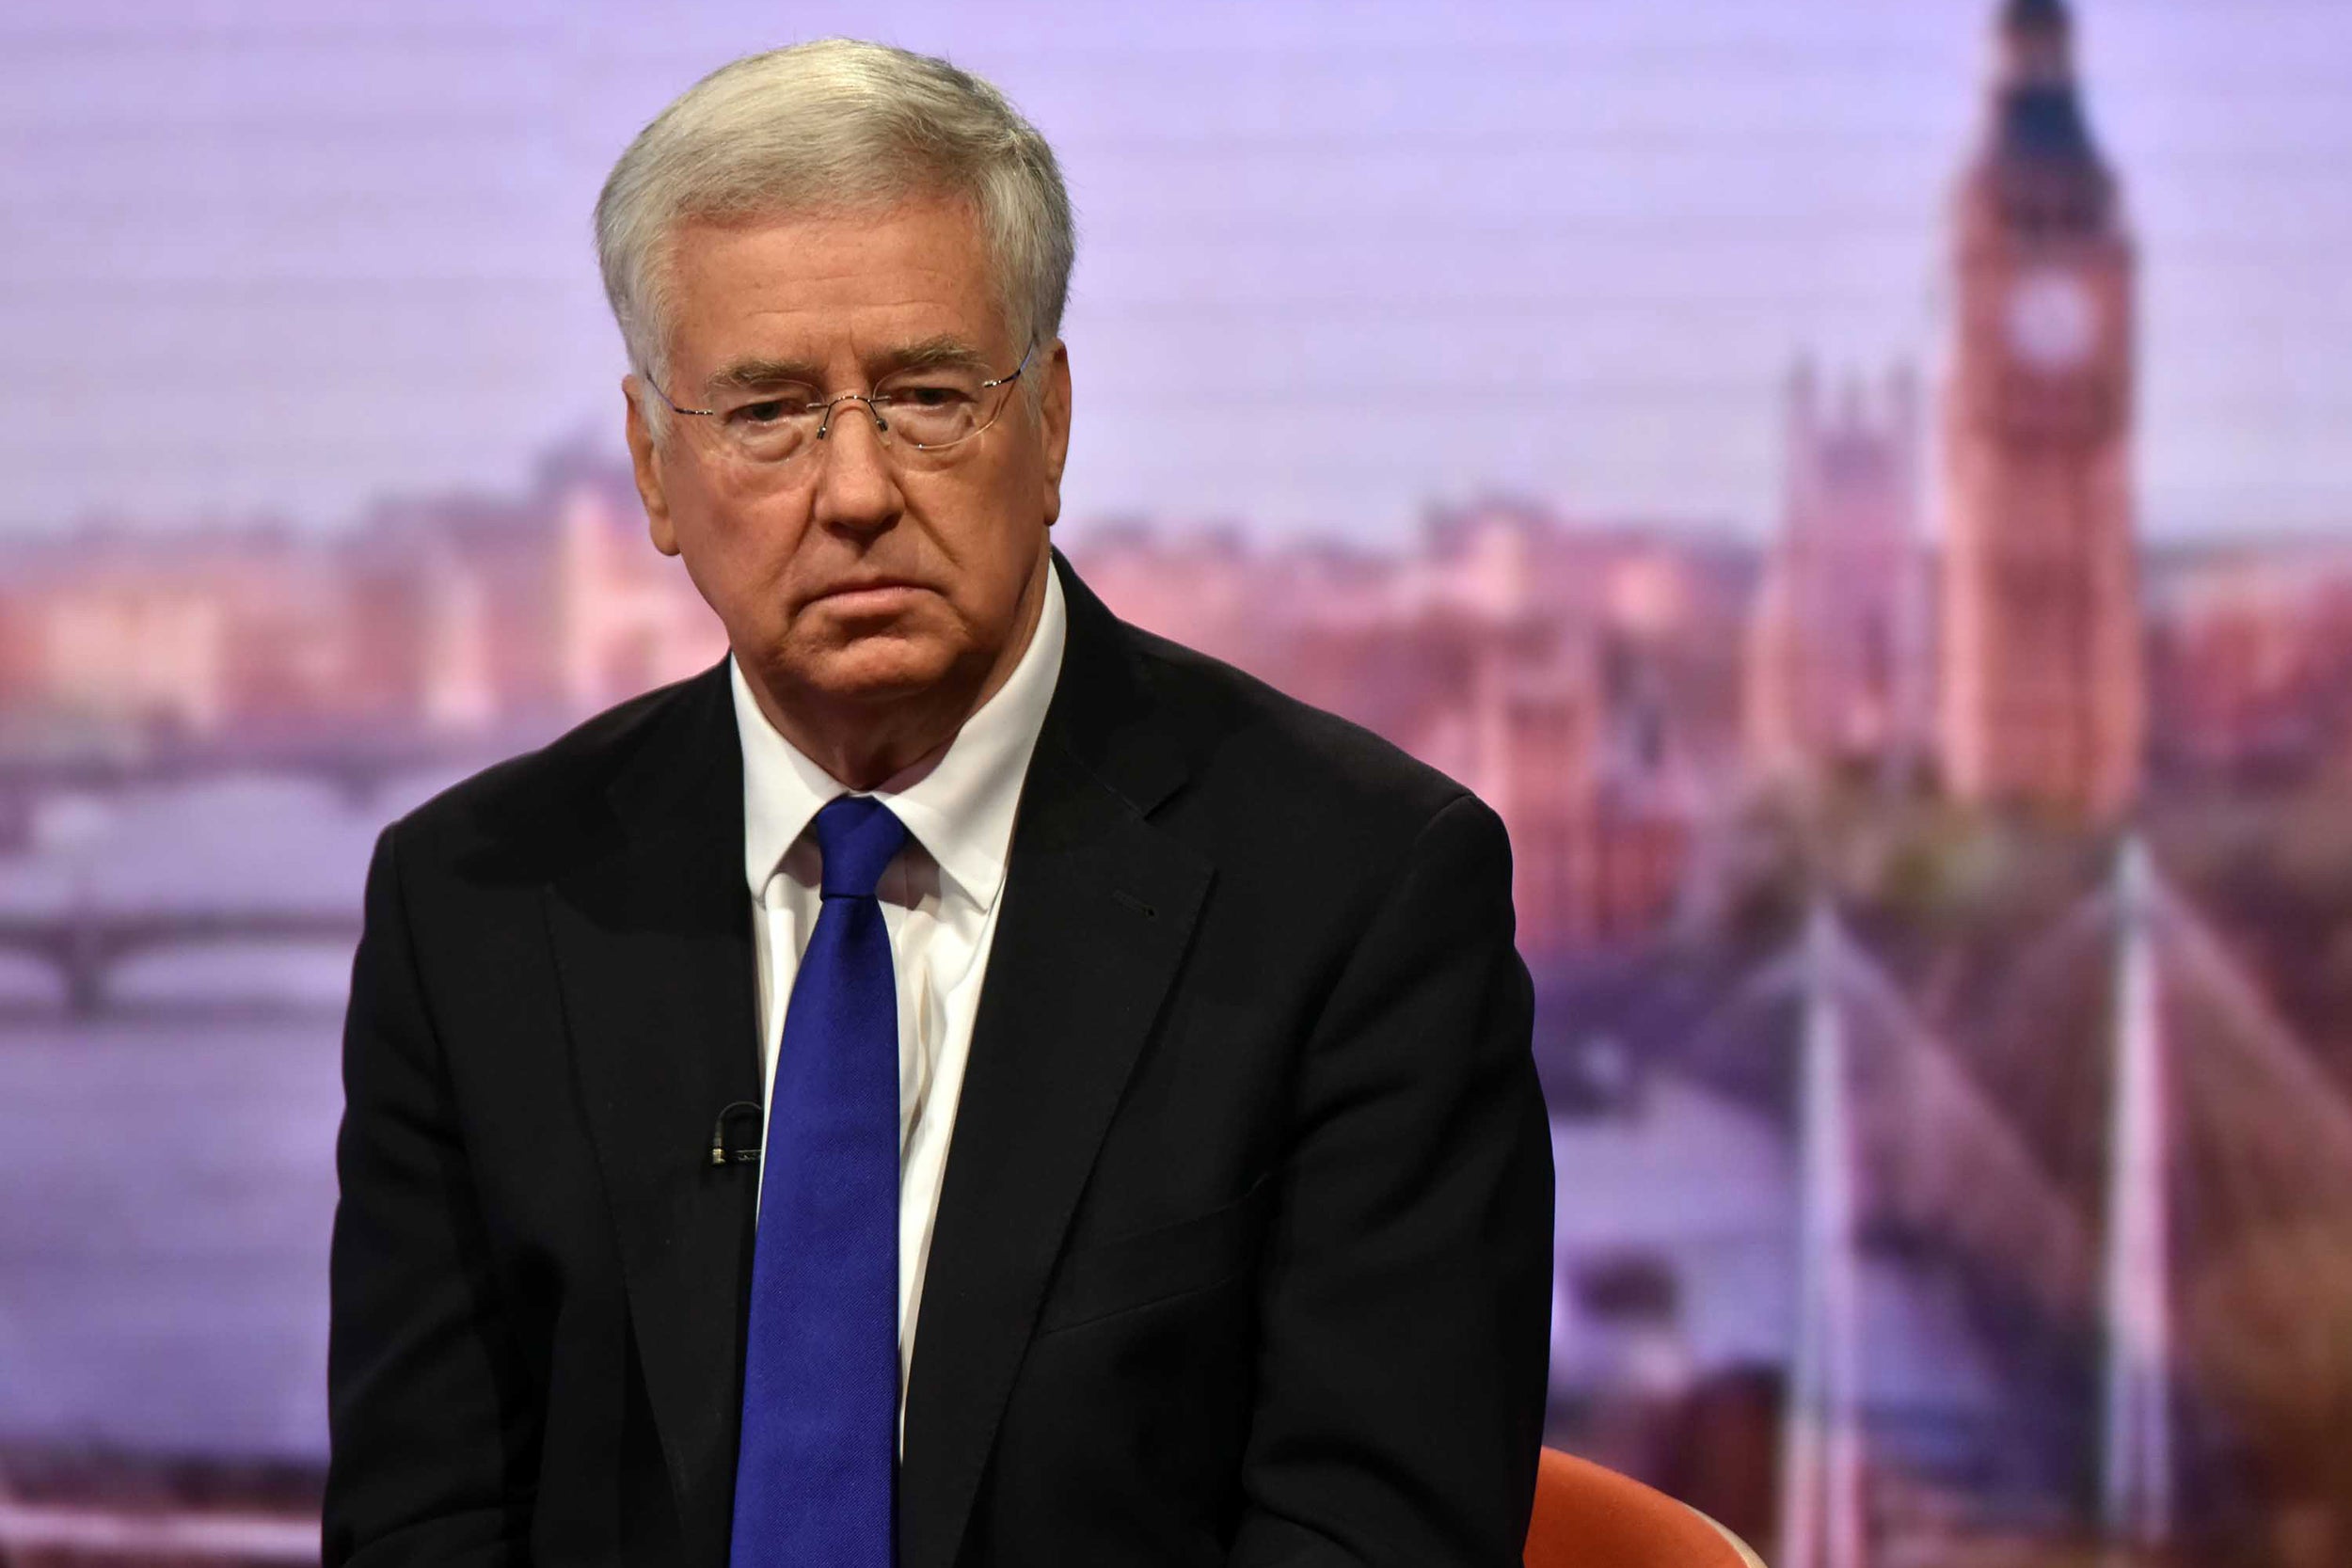 Michael Fallon has resigned as Defence Secretary amid the sexual harrassment scandal, admitting that in the past his actions fell ‘below the high standards’ of the armed forces